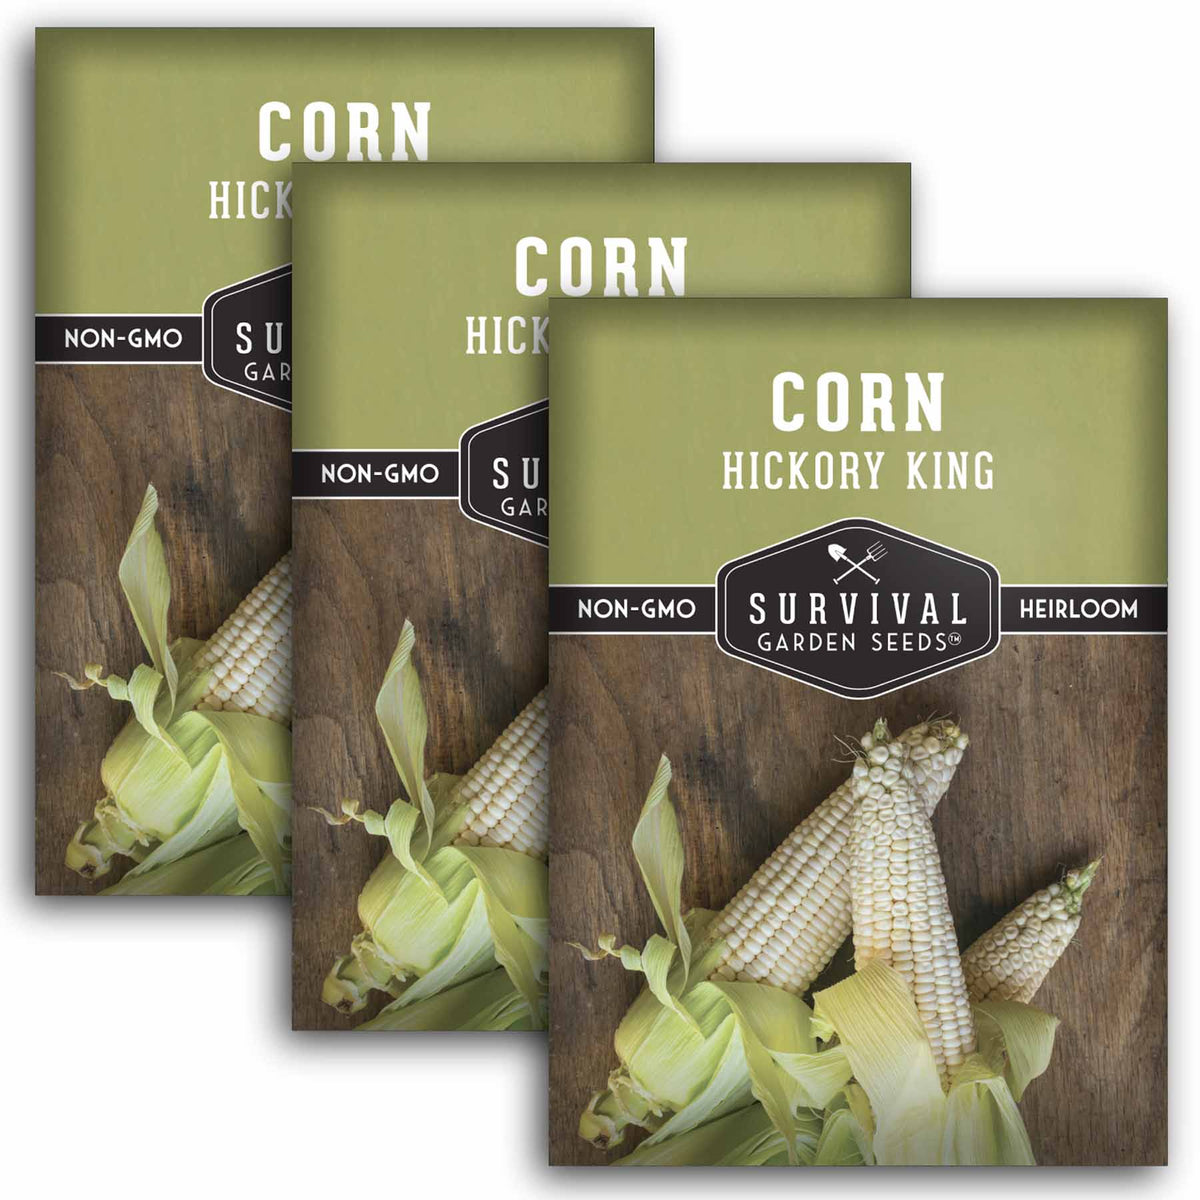 3 packets of Hickory King Corn seeds